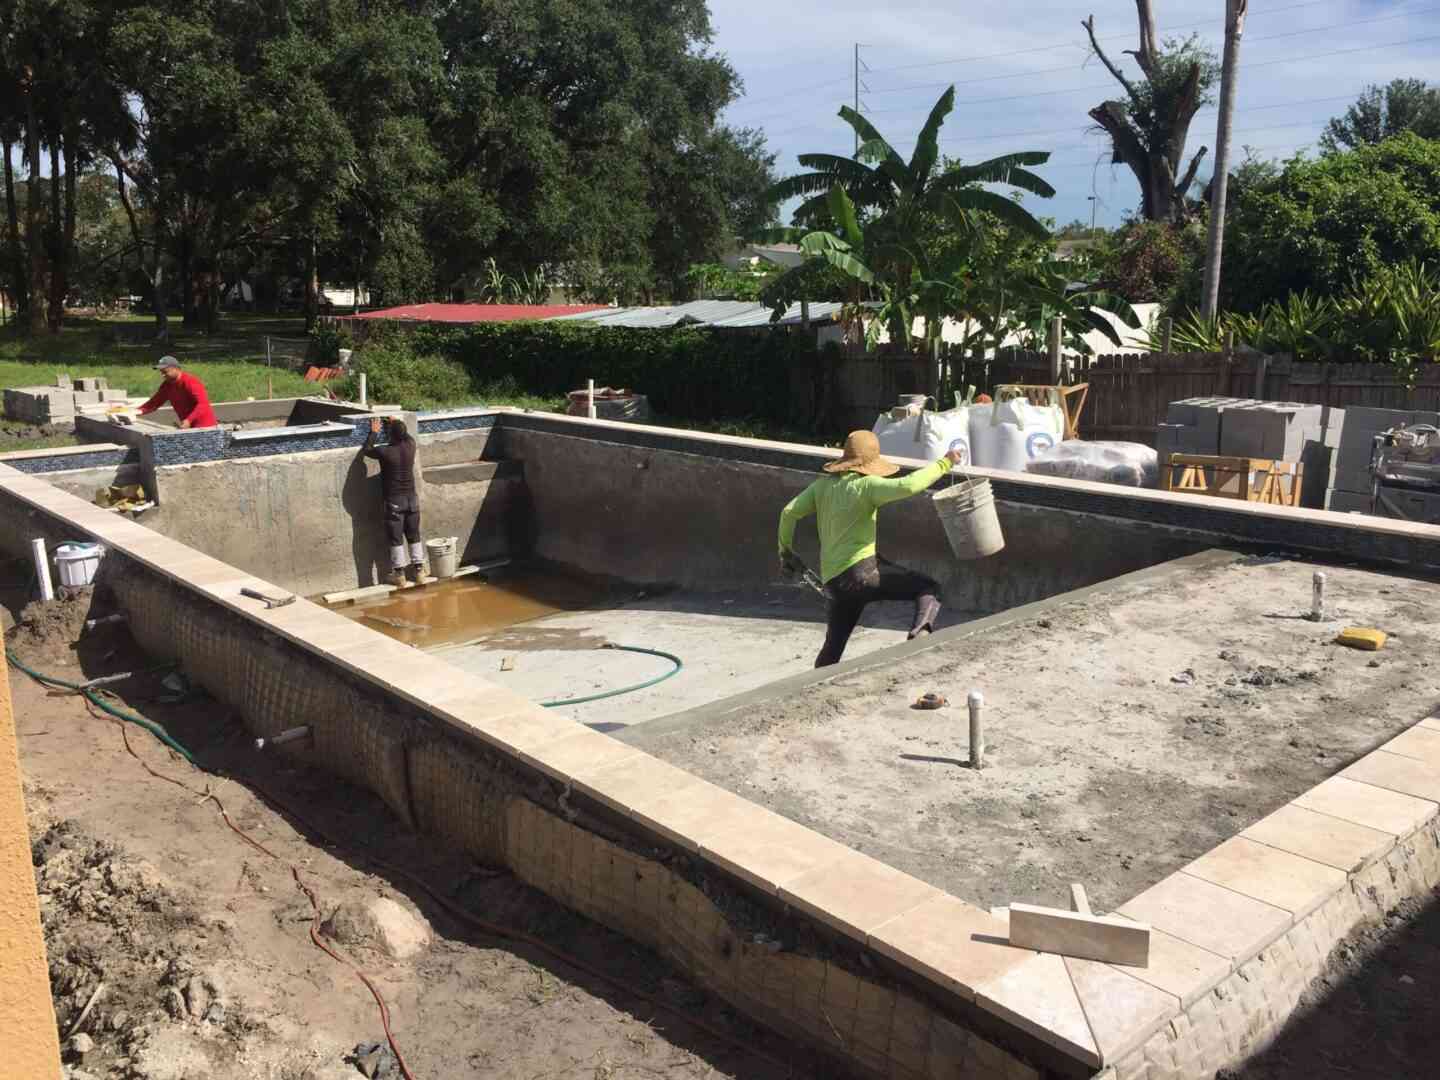 Construction workers building a pool